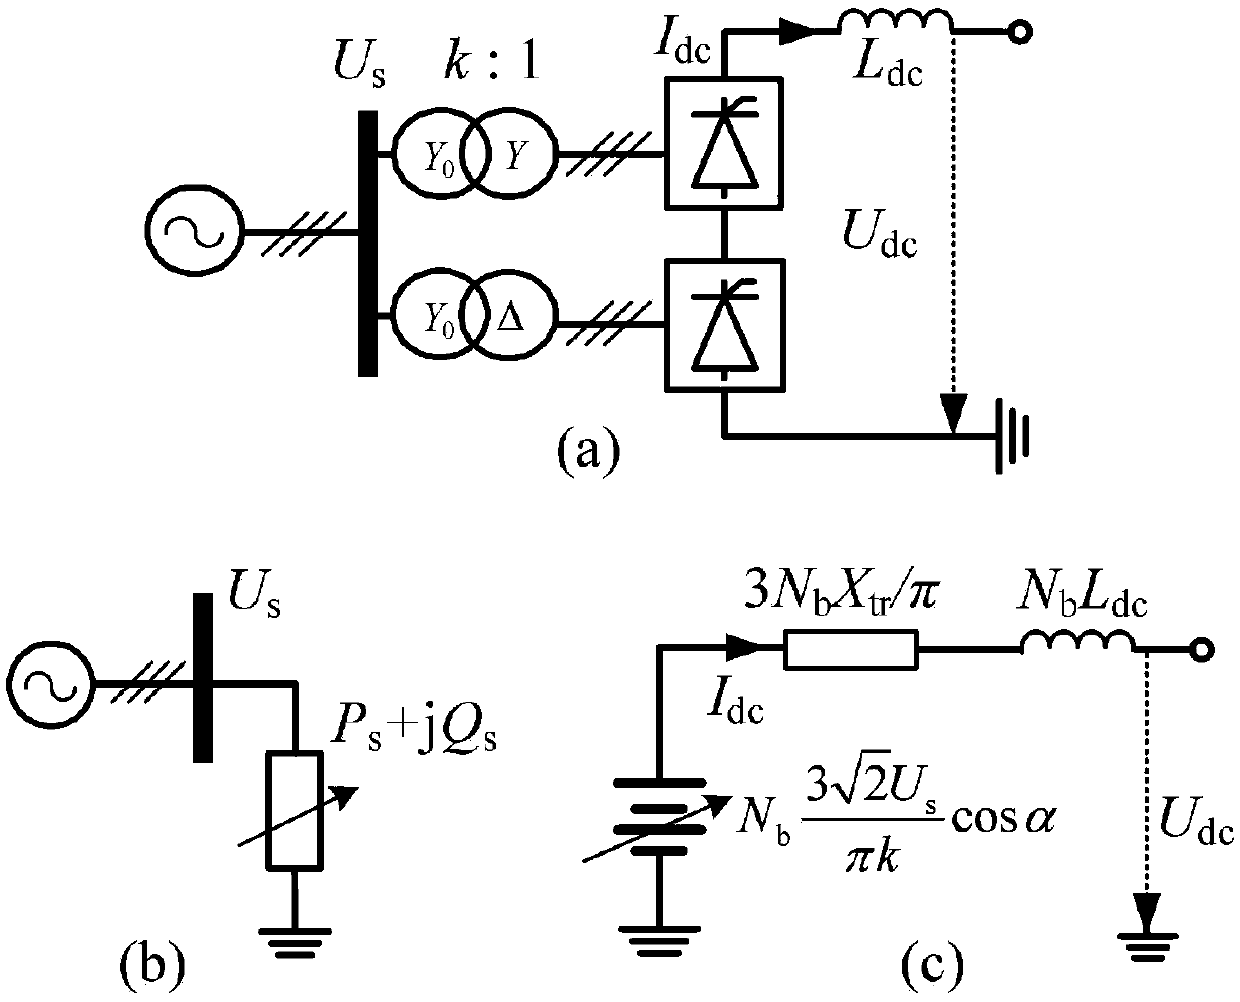 Electromechanical transient modeling method for distributed access type LCC-MMC hybrid direct current system